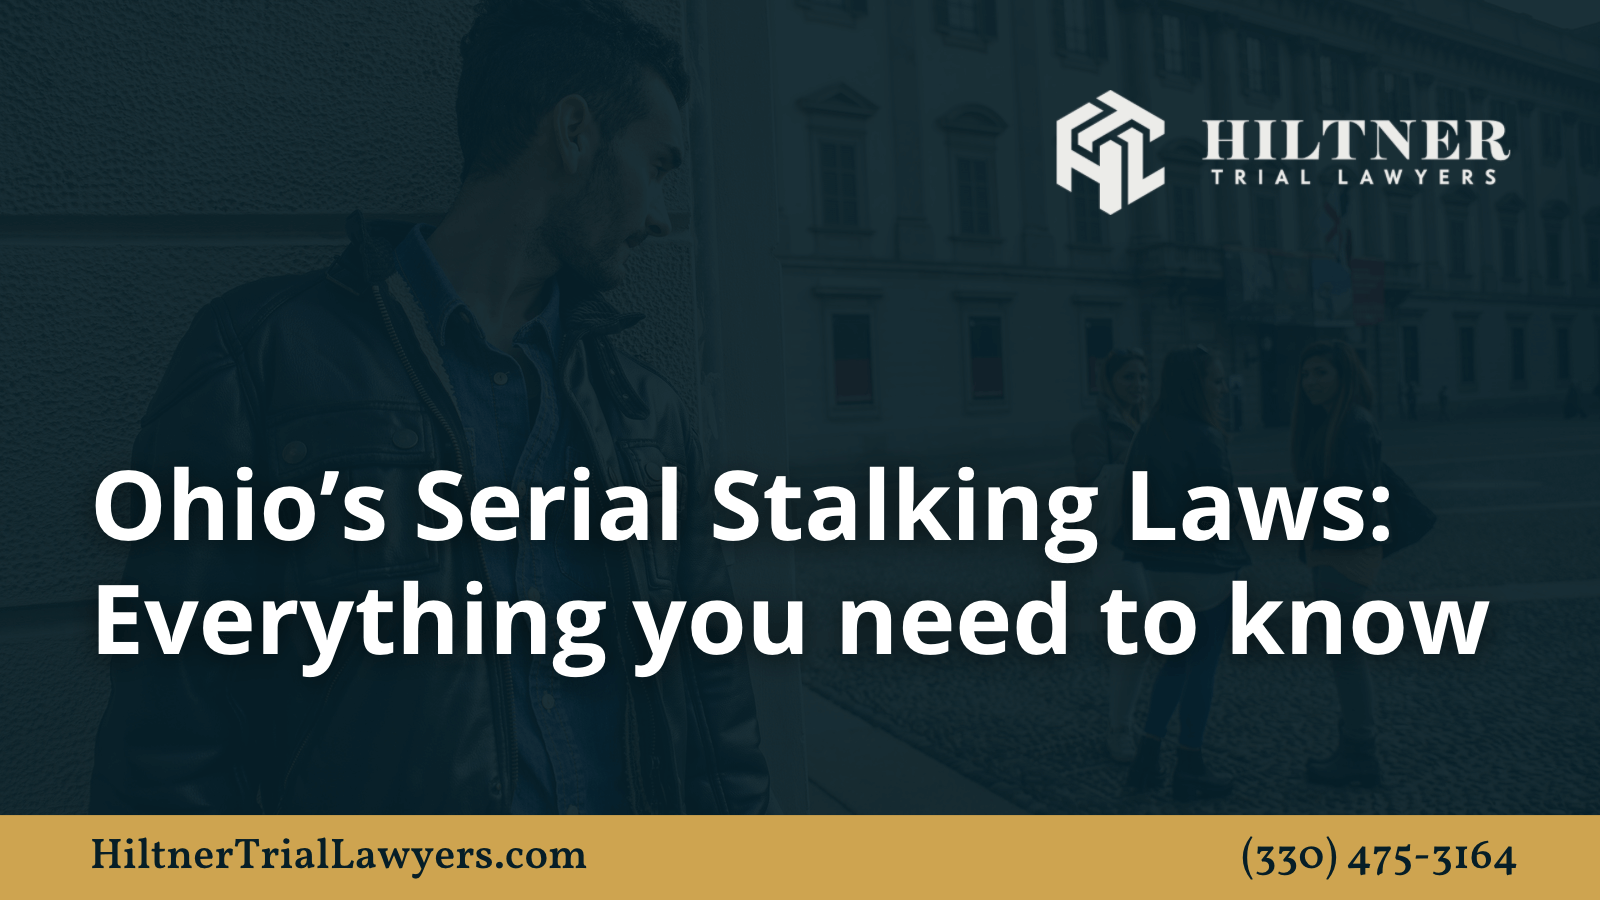 Ohio’s serial stalking laws everything you need to know